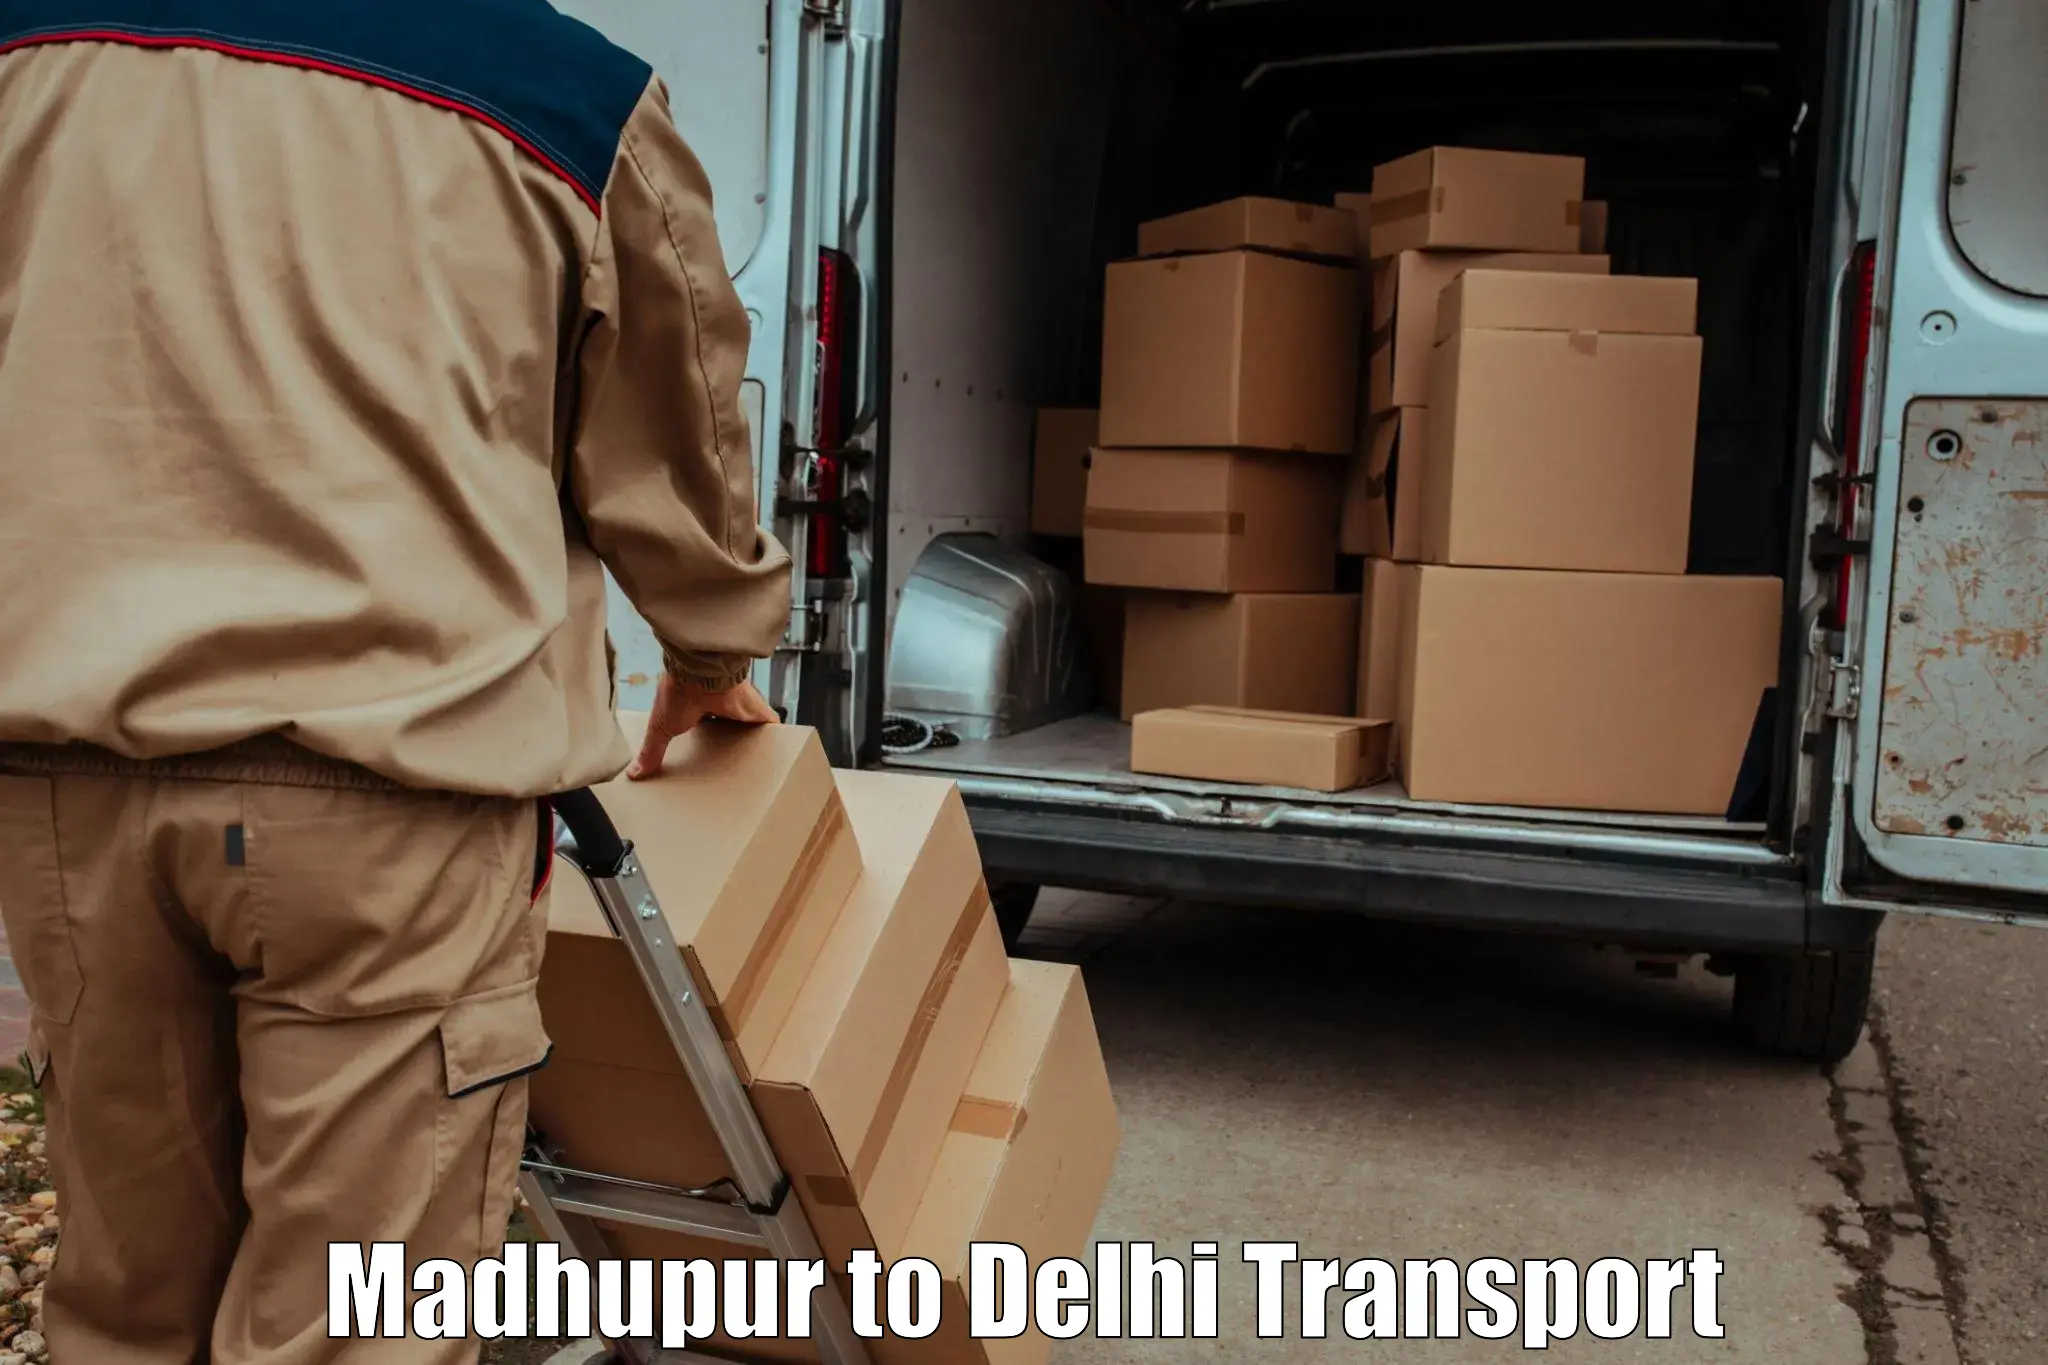 Transport in sharing in Madhupur to NCR